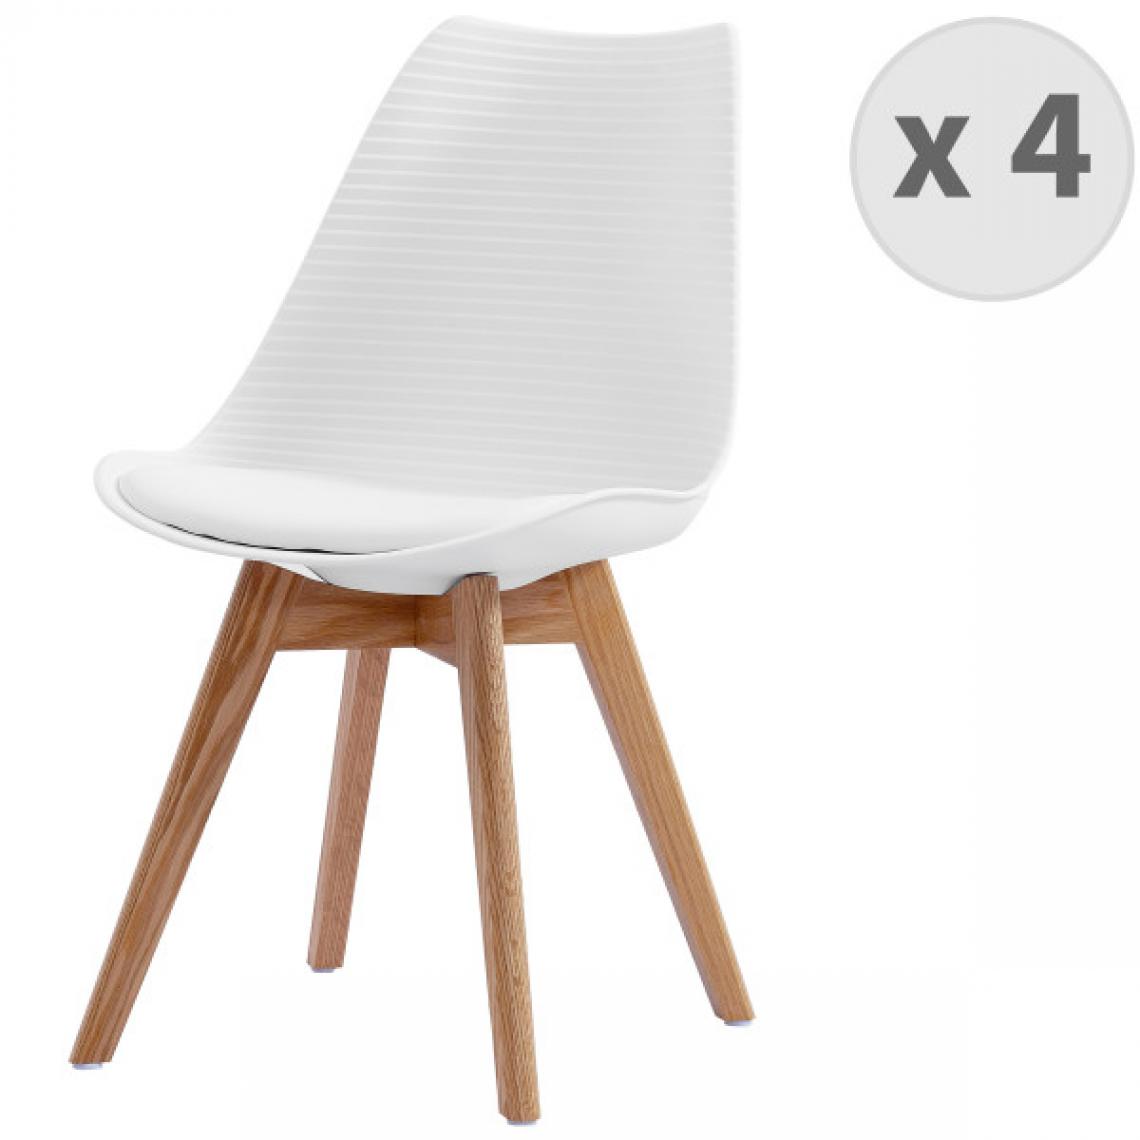 Moloo - BESSY-Chaise scandinave blanc pieds chêne (x4) - Chaises